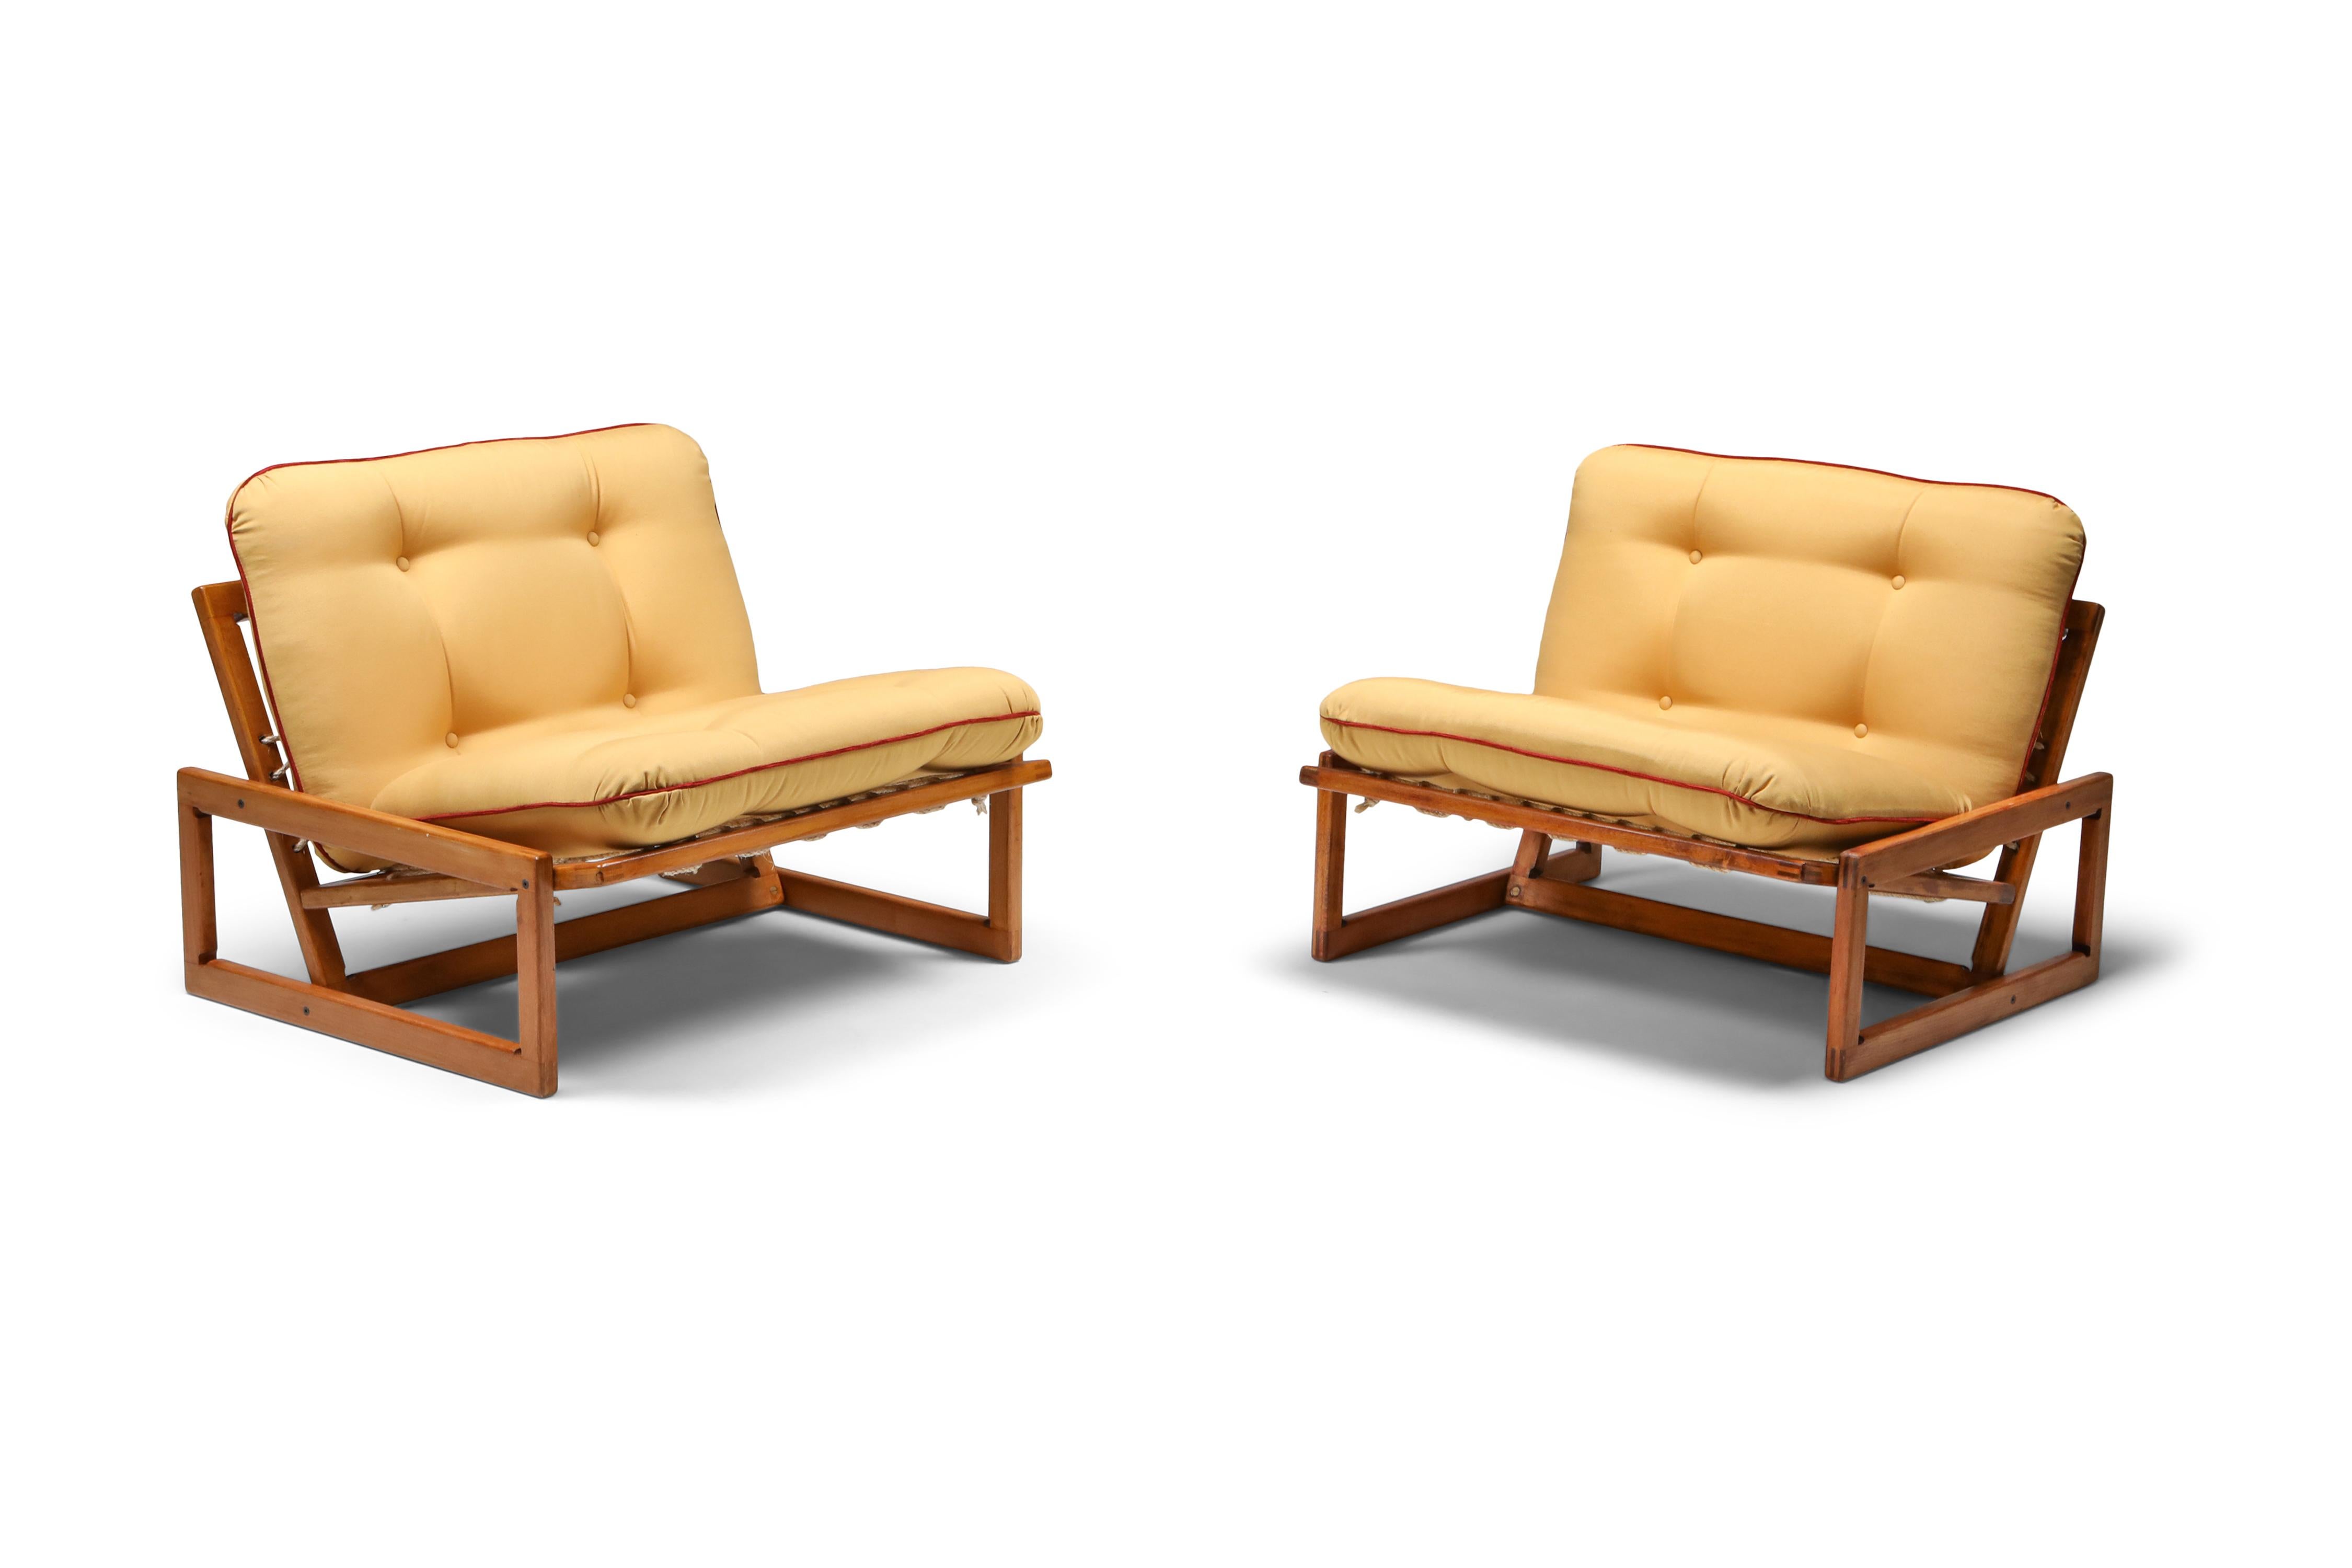 Mid-20th Century Cassina 'Carlotta' Lounge Chairs by Afra and Tobia Scarpa